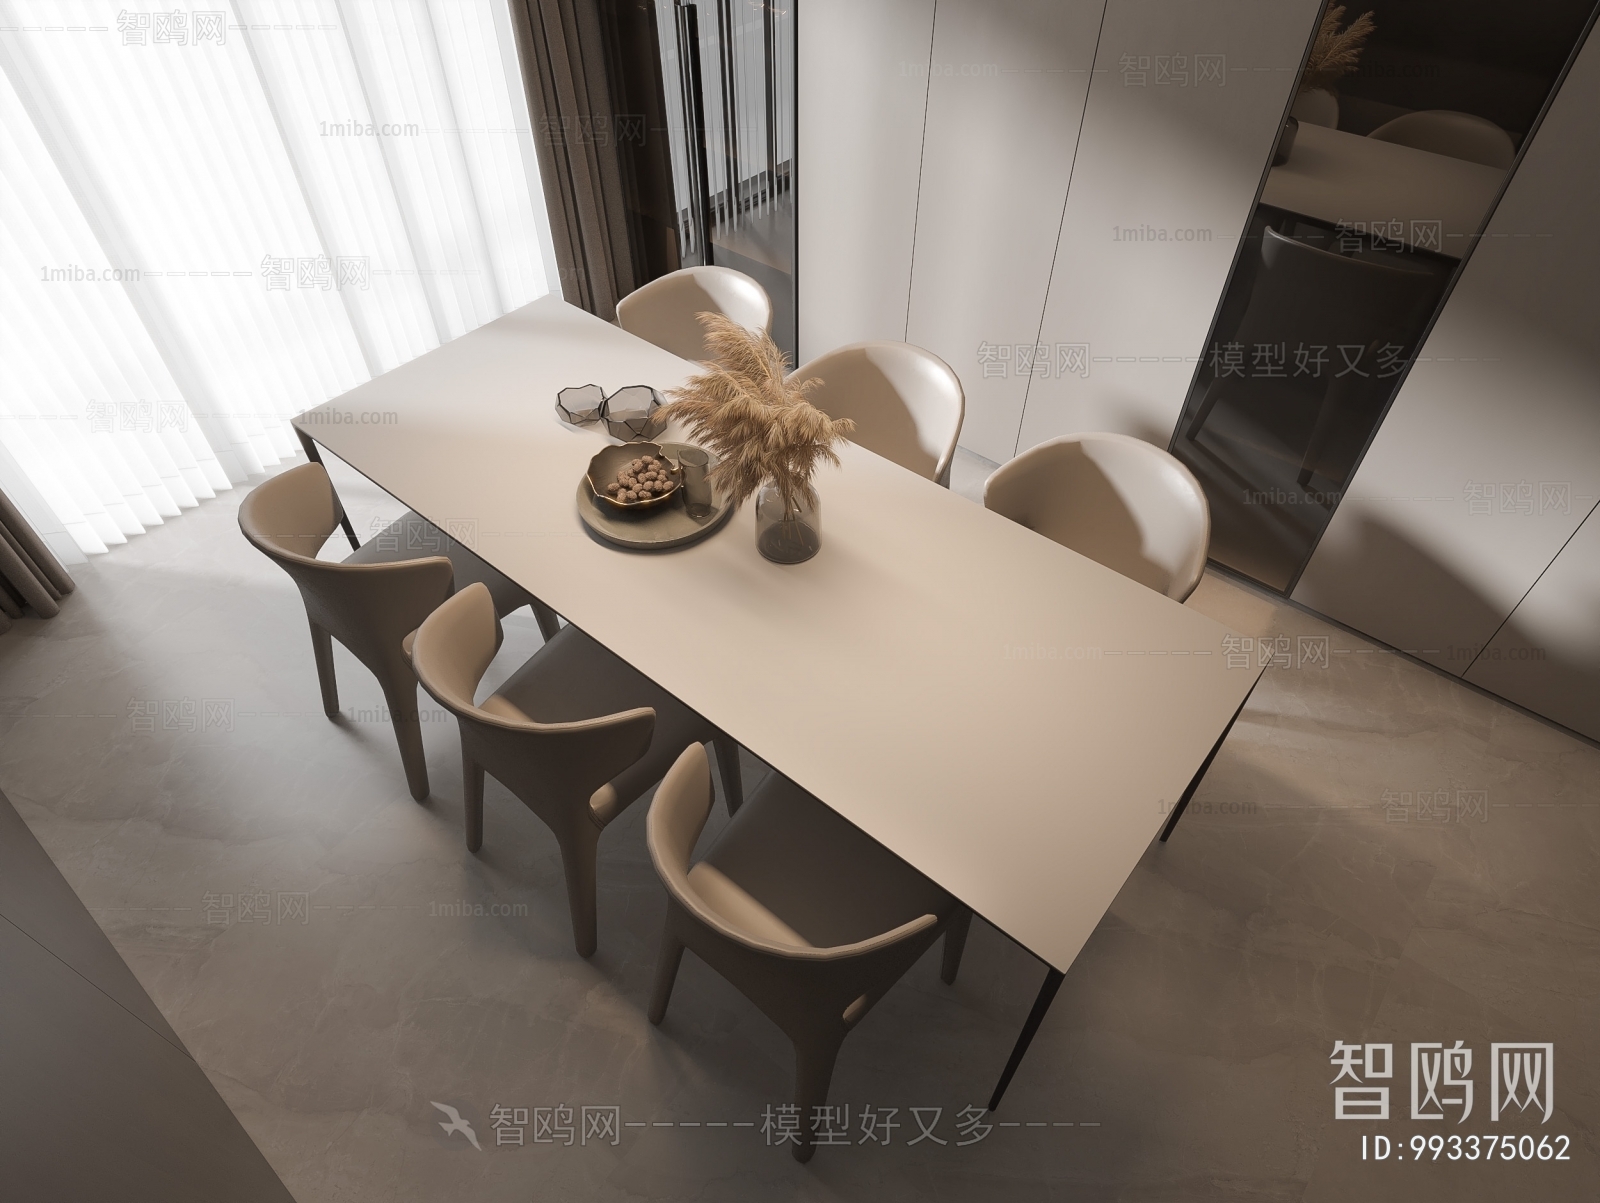 Modern Nordic Style Dining Table And Chairs